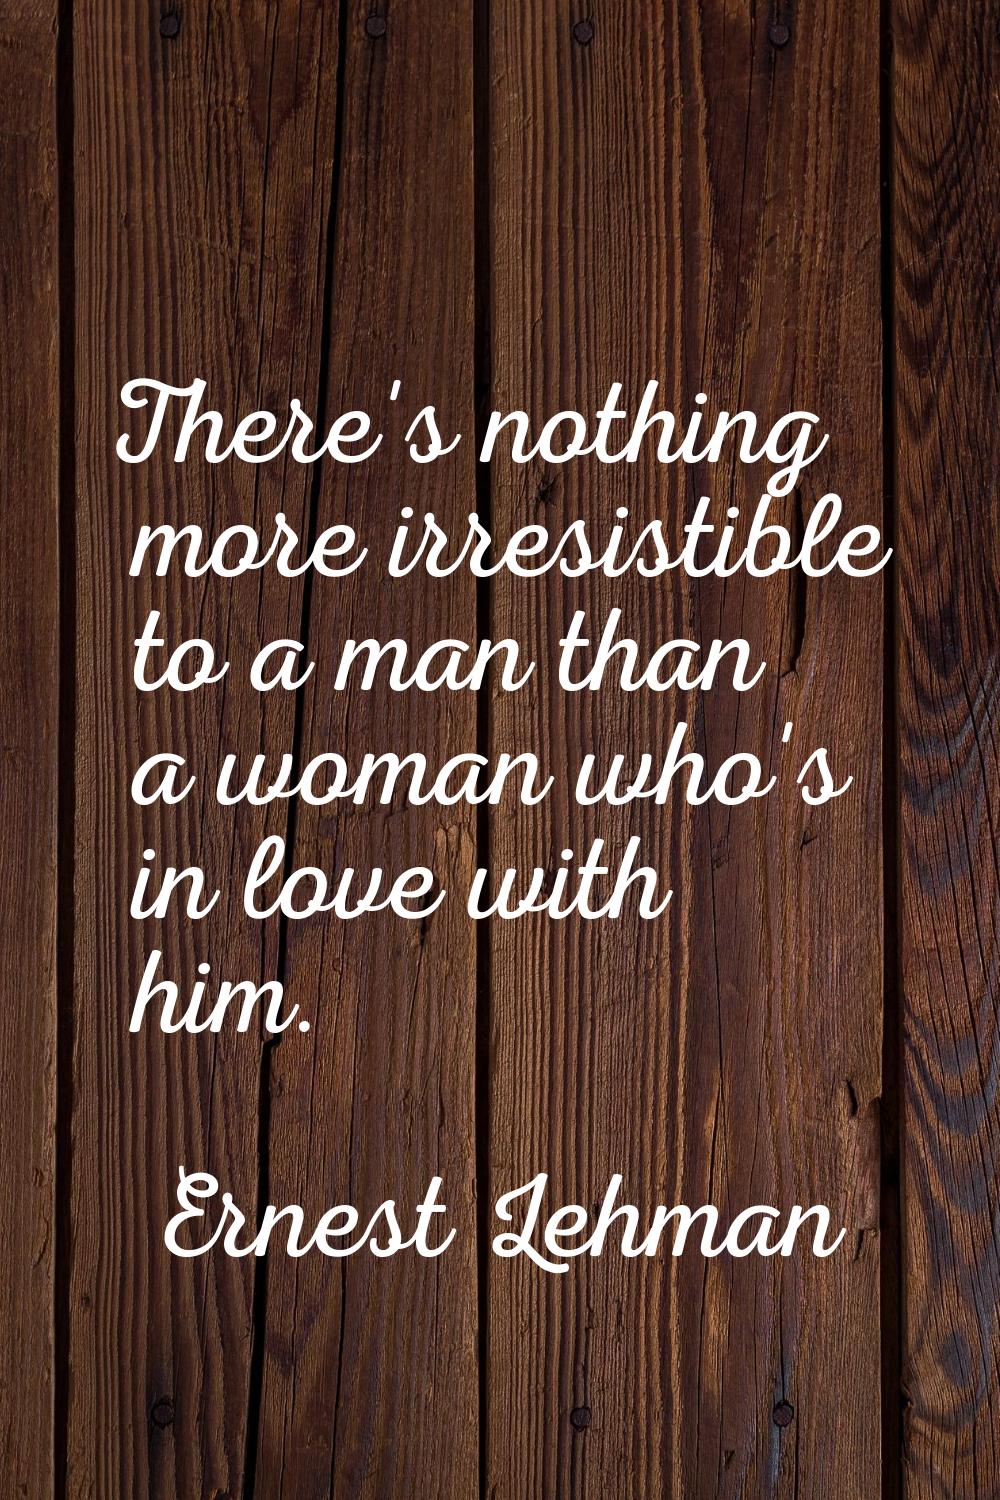 There's nothing more irresistible to a man than a woman who's in love with him.